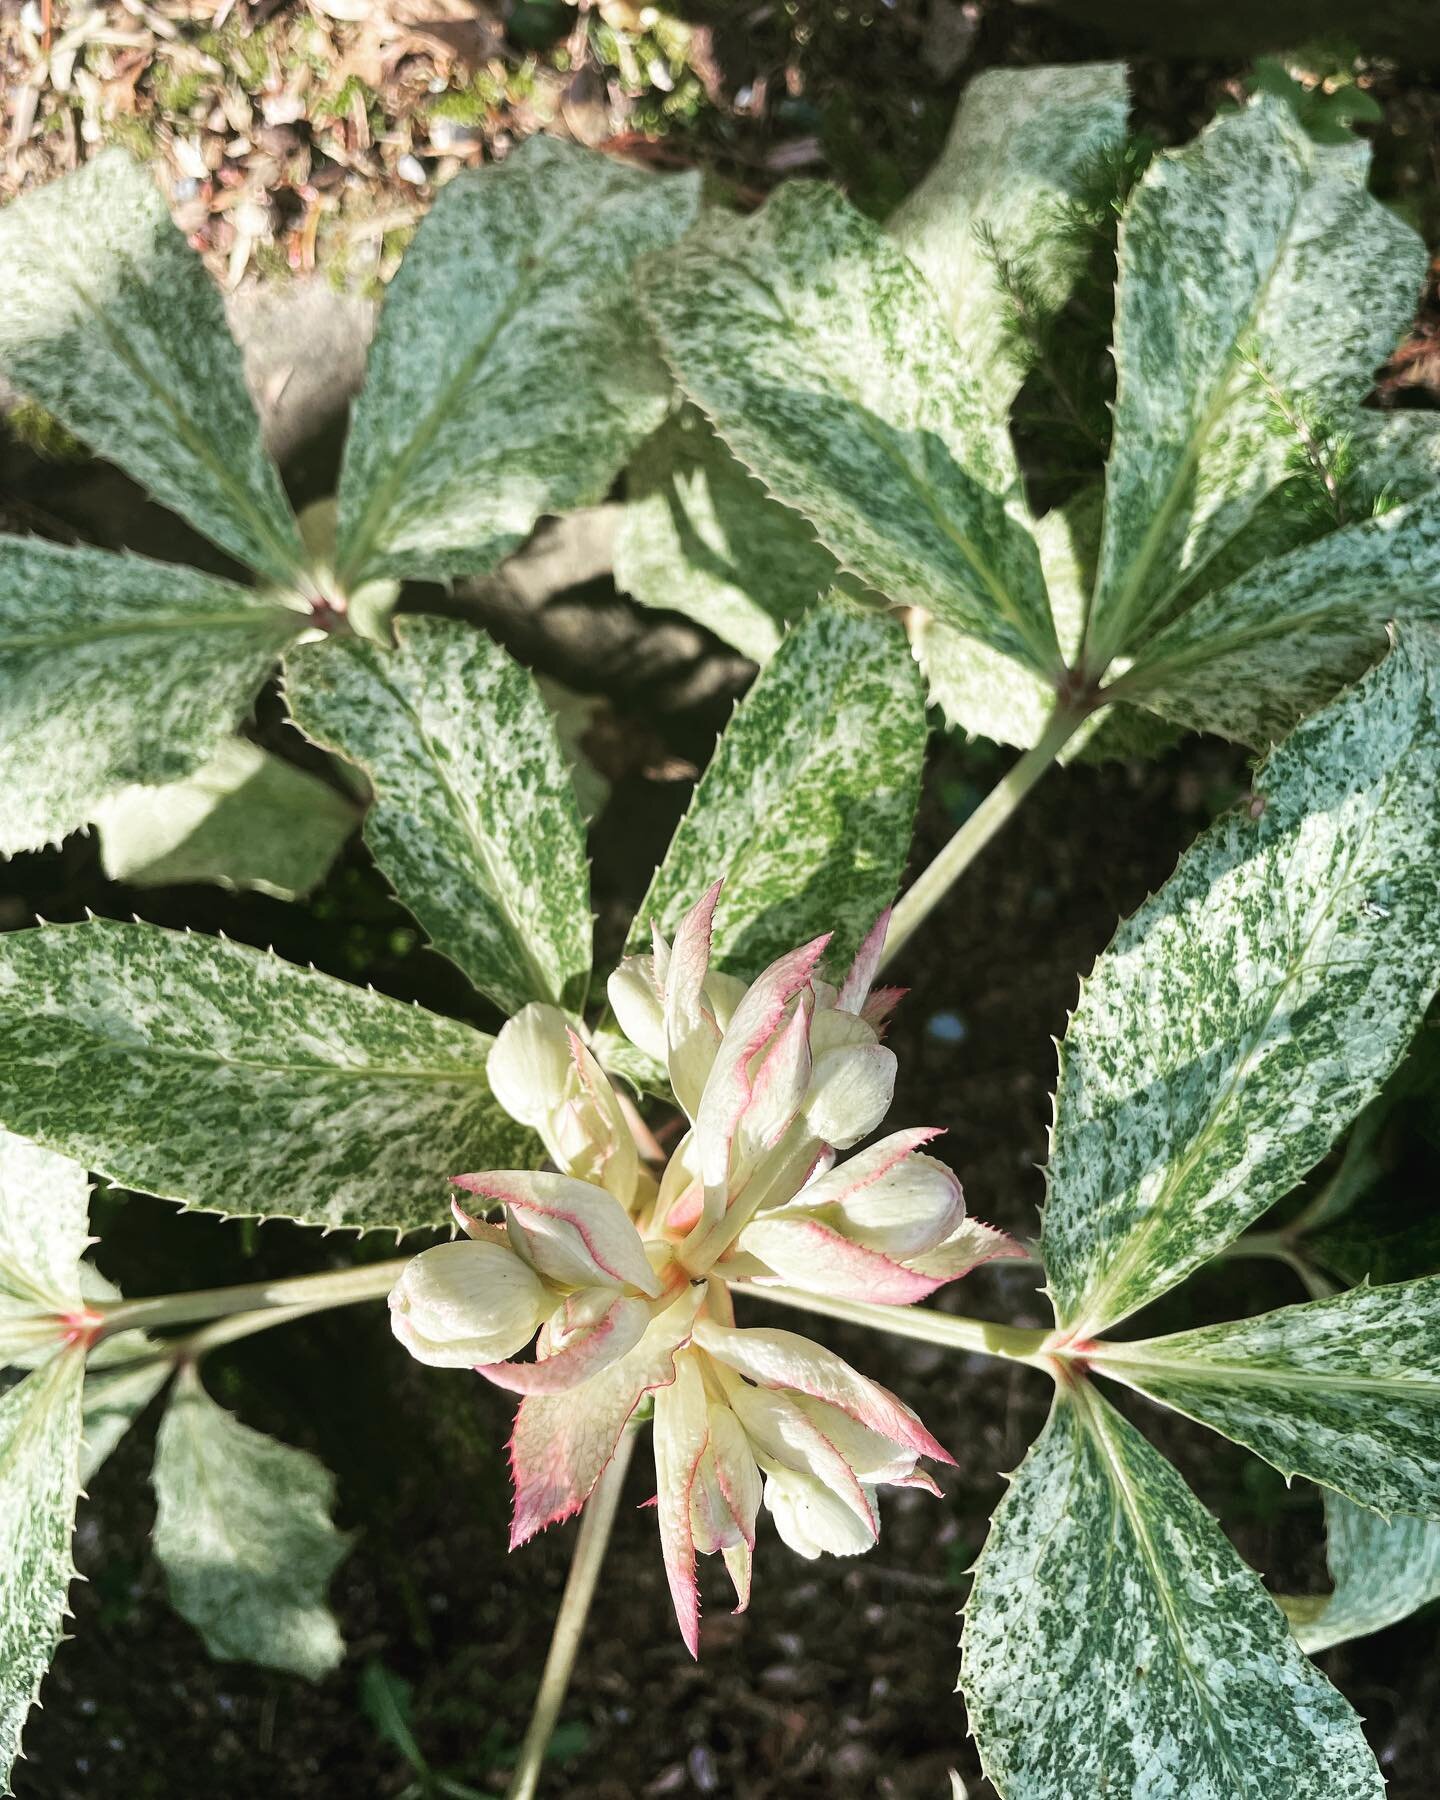 Look at this Beauty!  Snow fever helleborus.  Gorgeous leaf year round (here in PNW). Today I&rsquo;m soaking up these pale cream blossoms with the pink edges - such a beautiful detail.  What&rsquo;s blooming in your garden today?  #beauty #gardentre